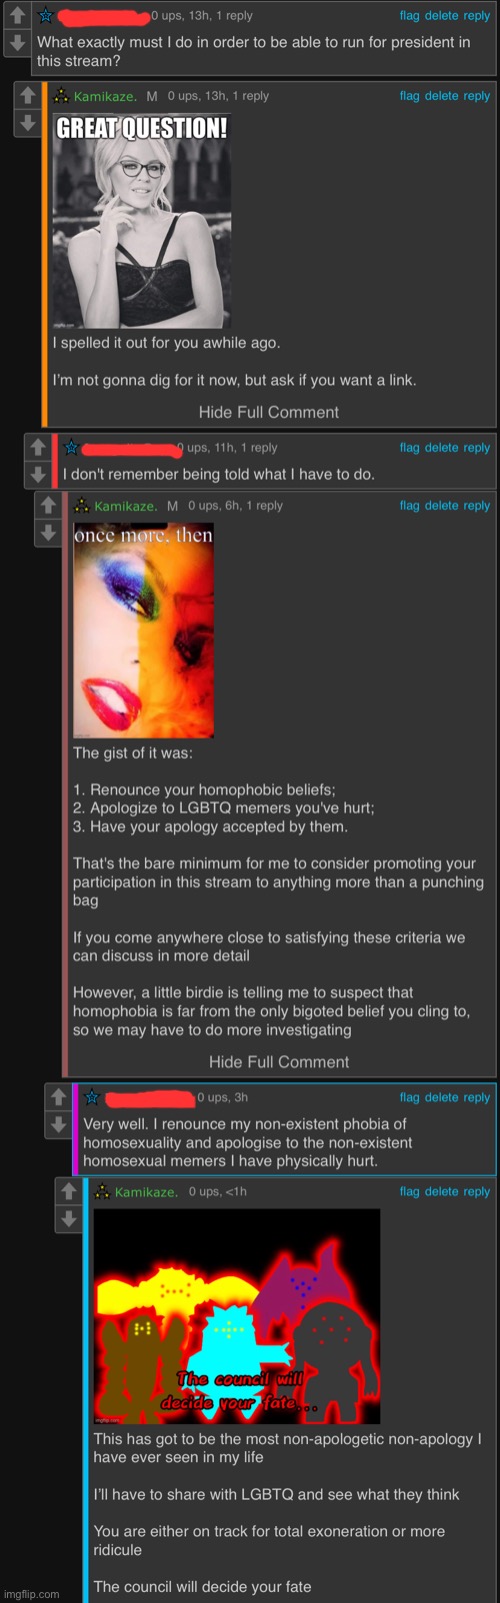 [i know some of you are getting tired of “warring with homophobes,” but as for me, my patience for this is unlimited. Council?] | image tagged in homophobic,homophobia,homophobe,the council will decide your fate,meanwhile on imgflip,imgflip user | made w/ Imgflip meme maker